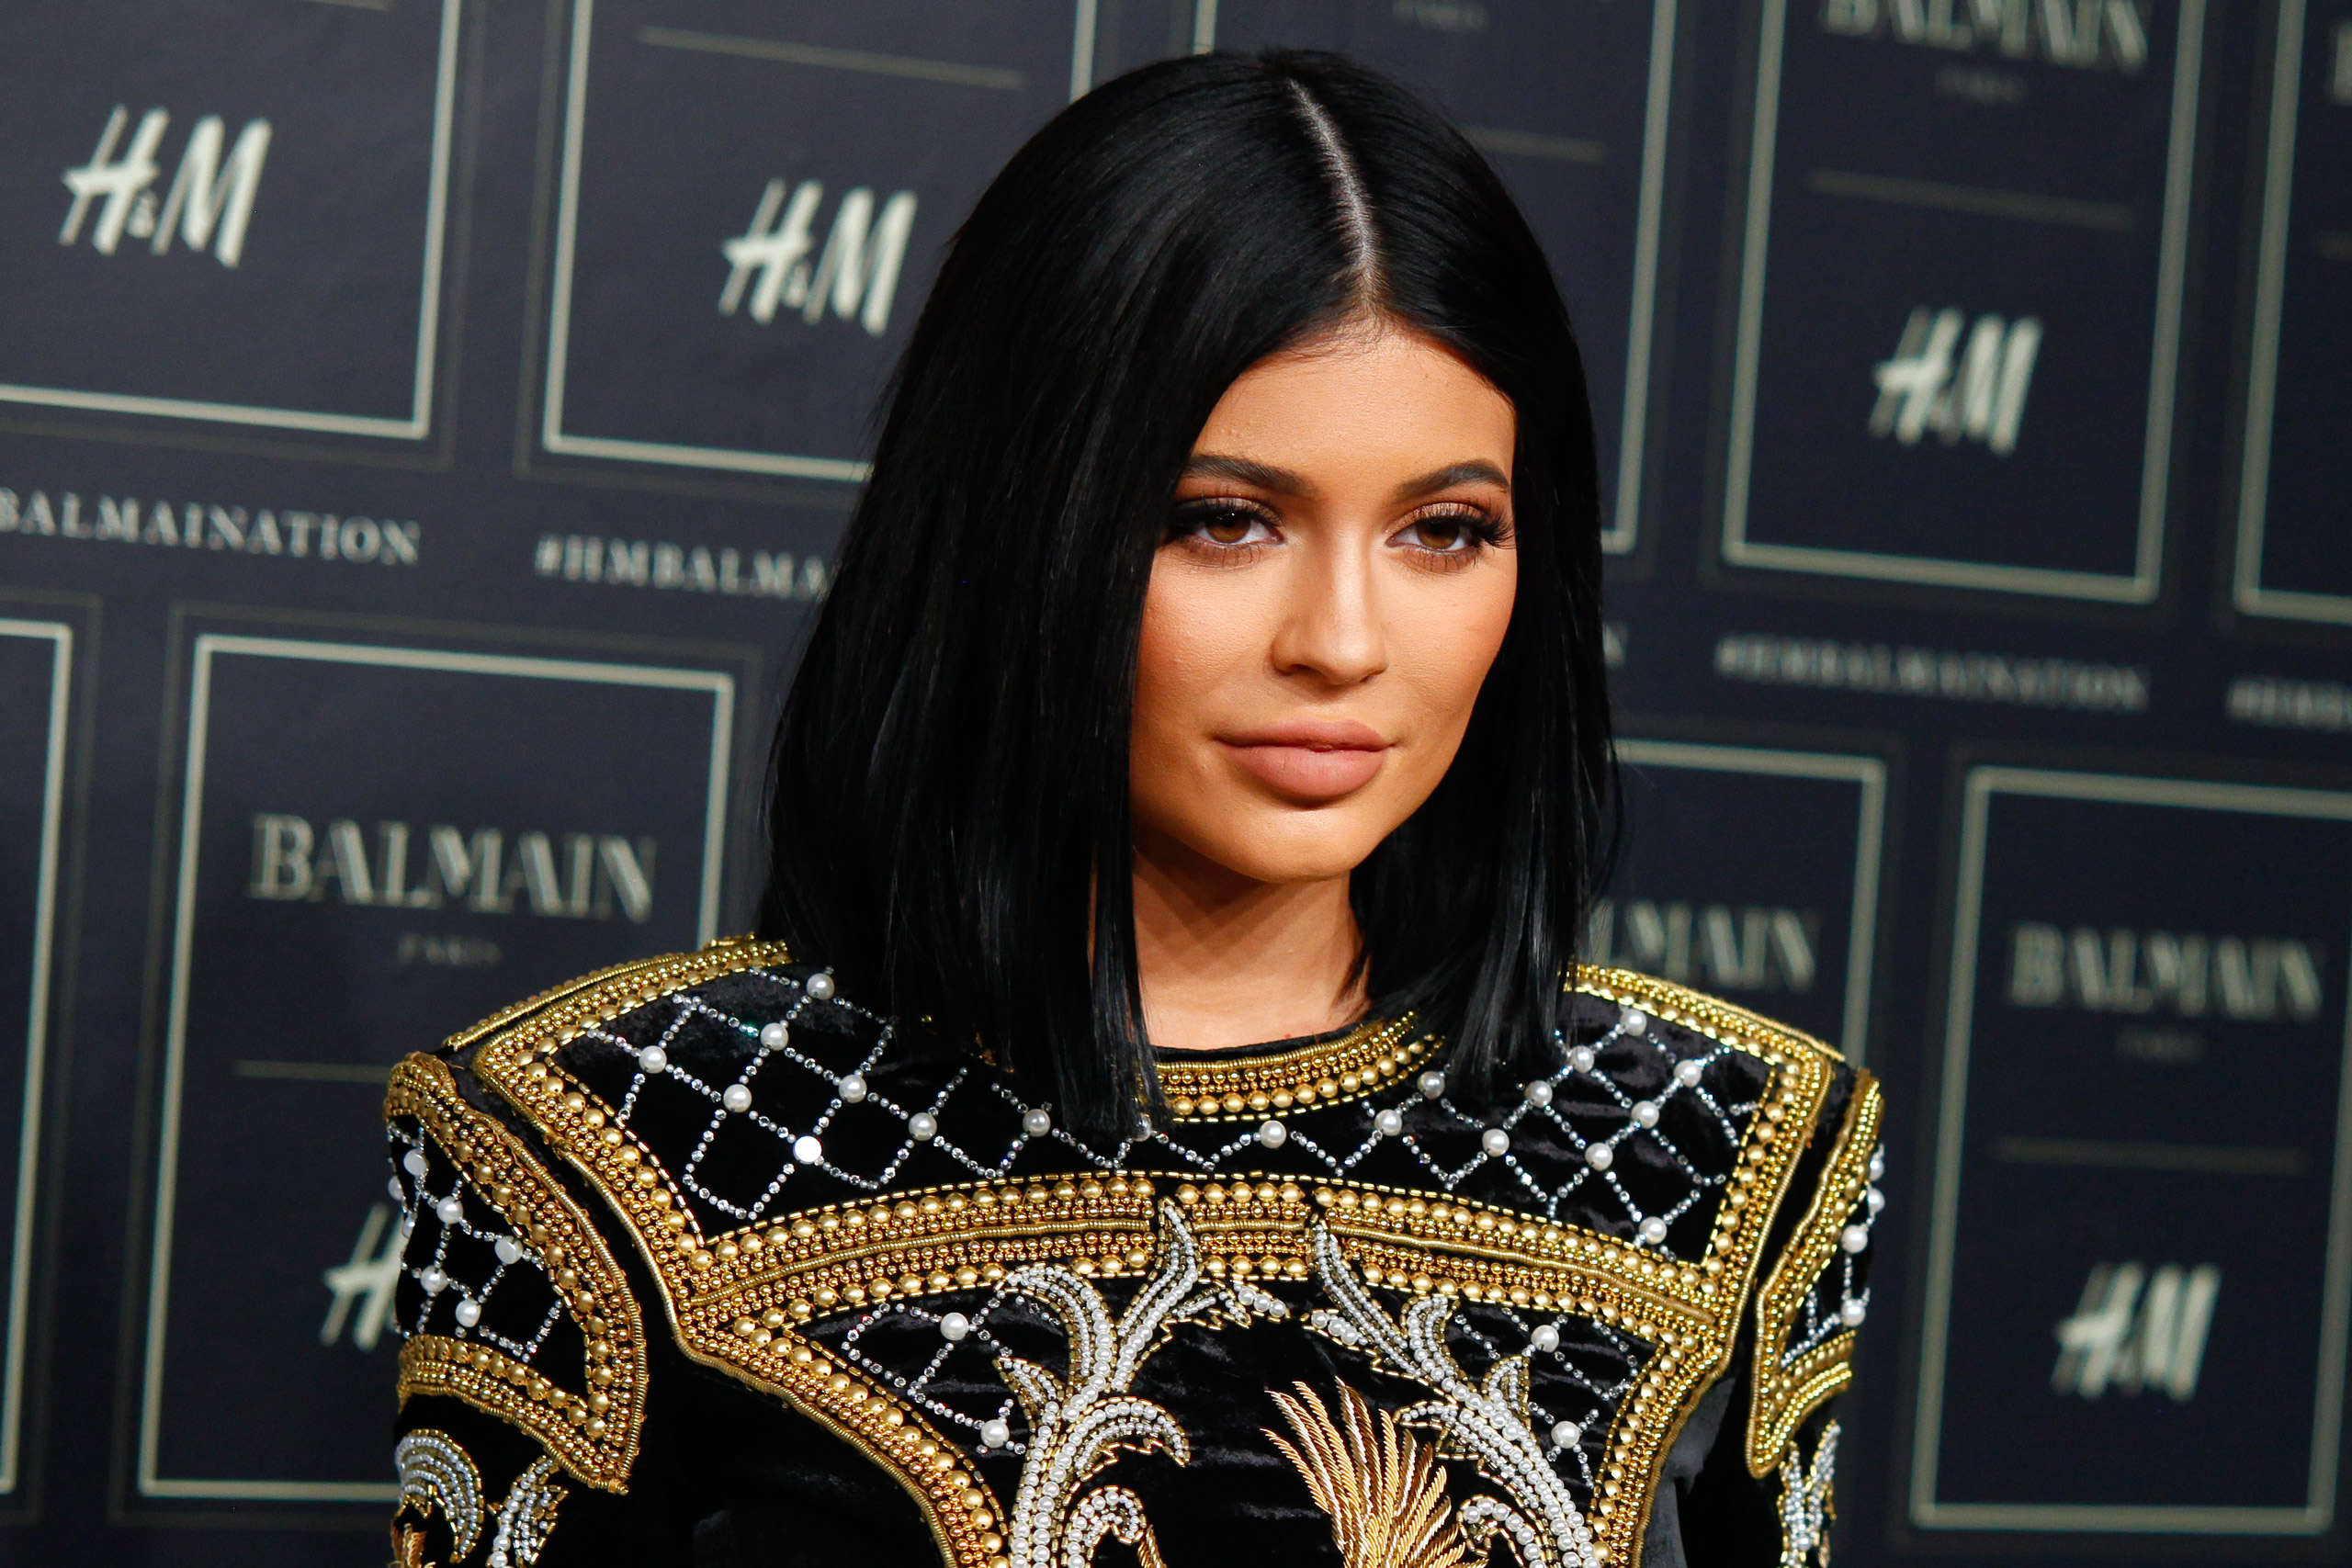 Kylie Jenner attends the BALMAIN x H&M Collection launch event at 23 Wall Street on Oct. 20, 2015 in New York City . (Andy Kropa—Invision/AP)